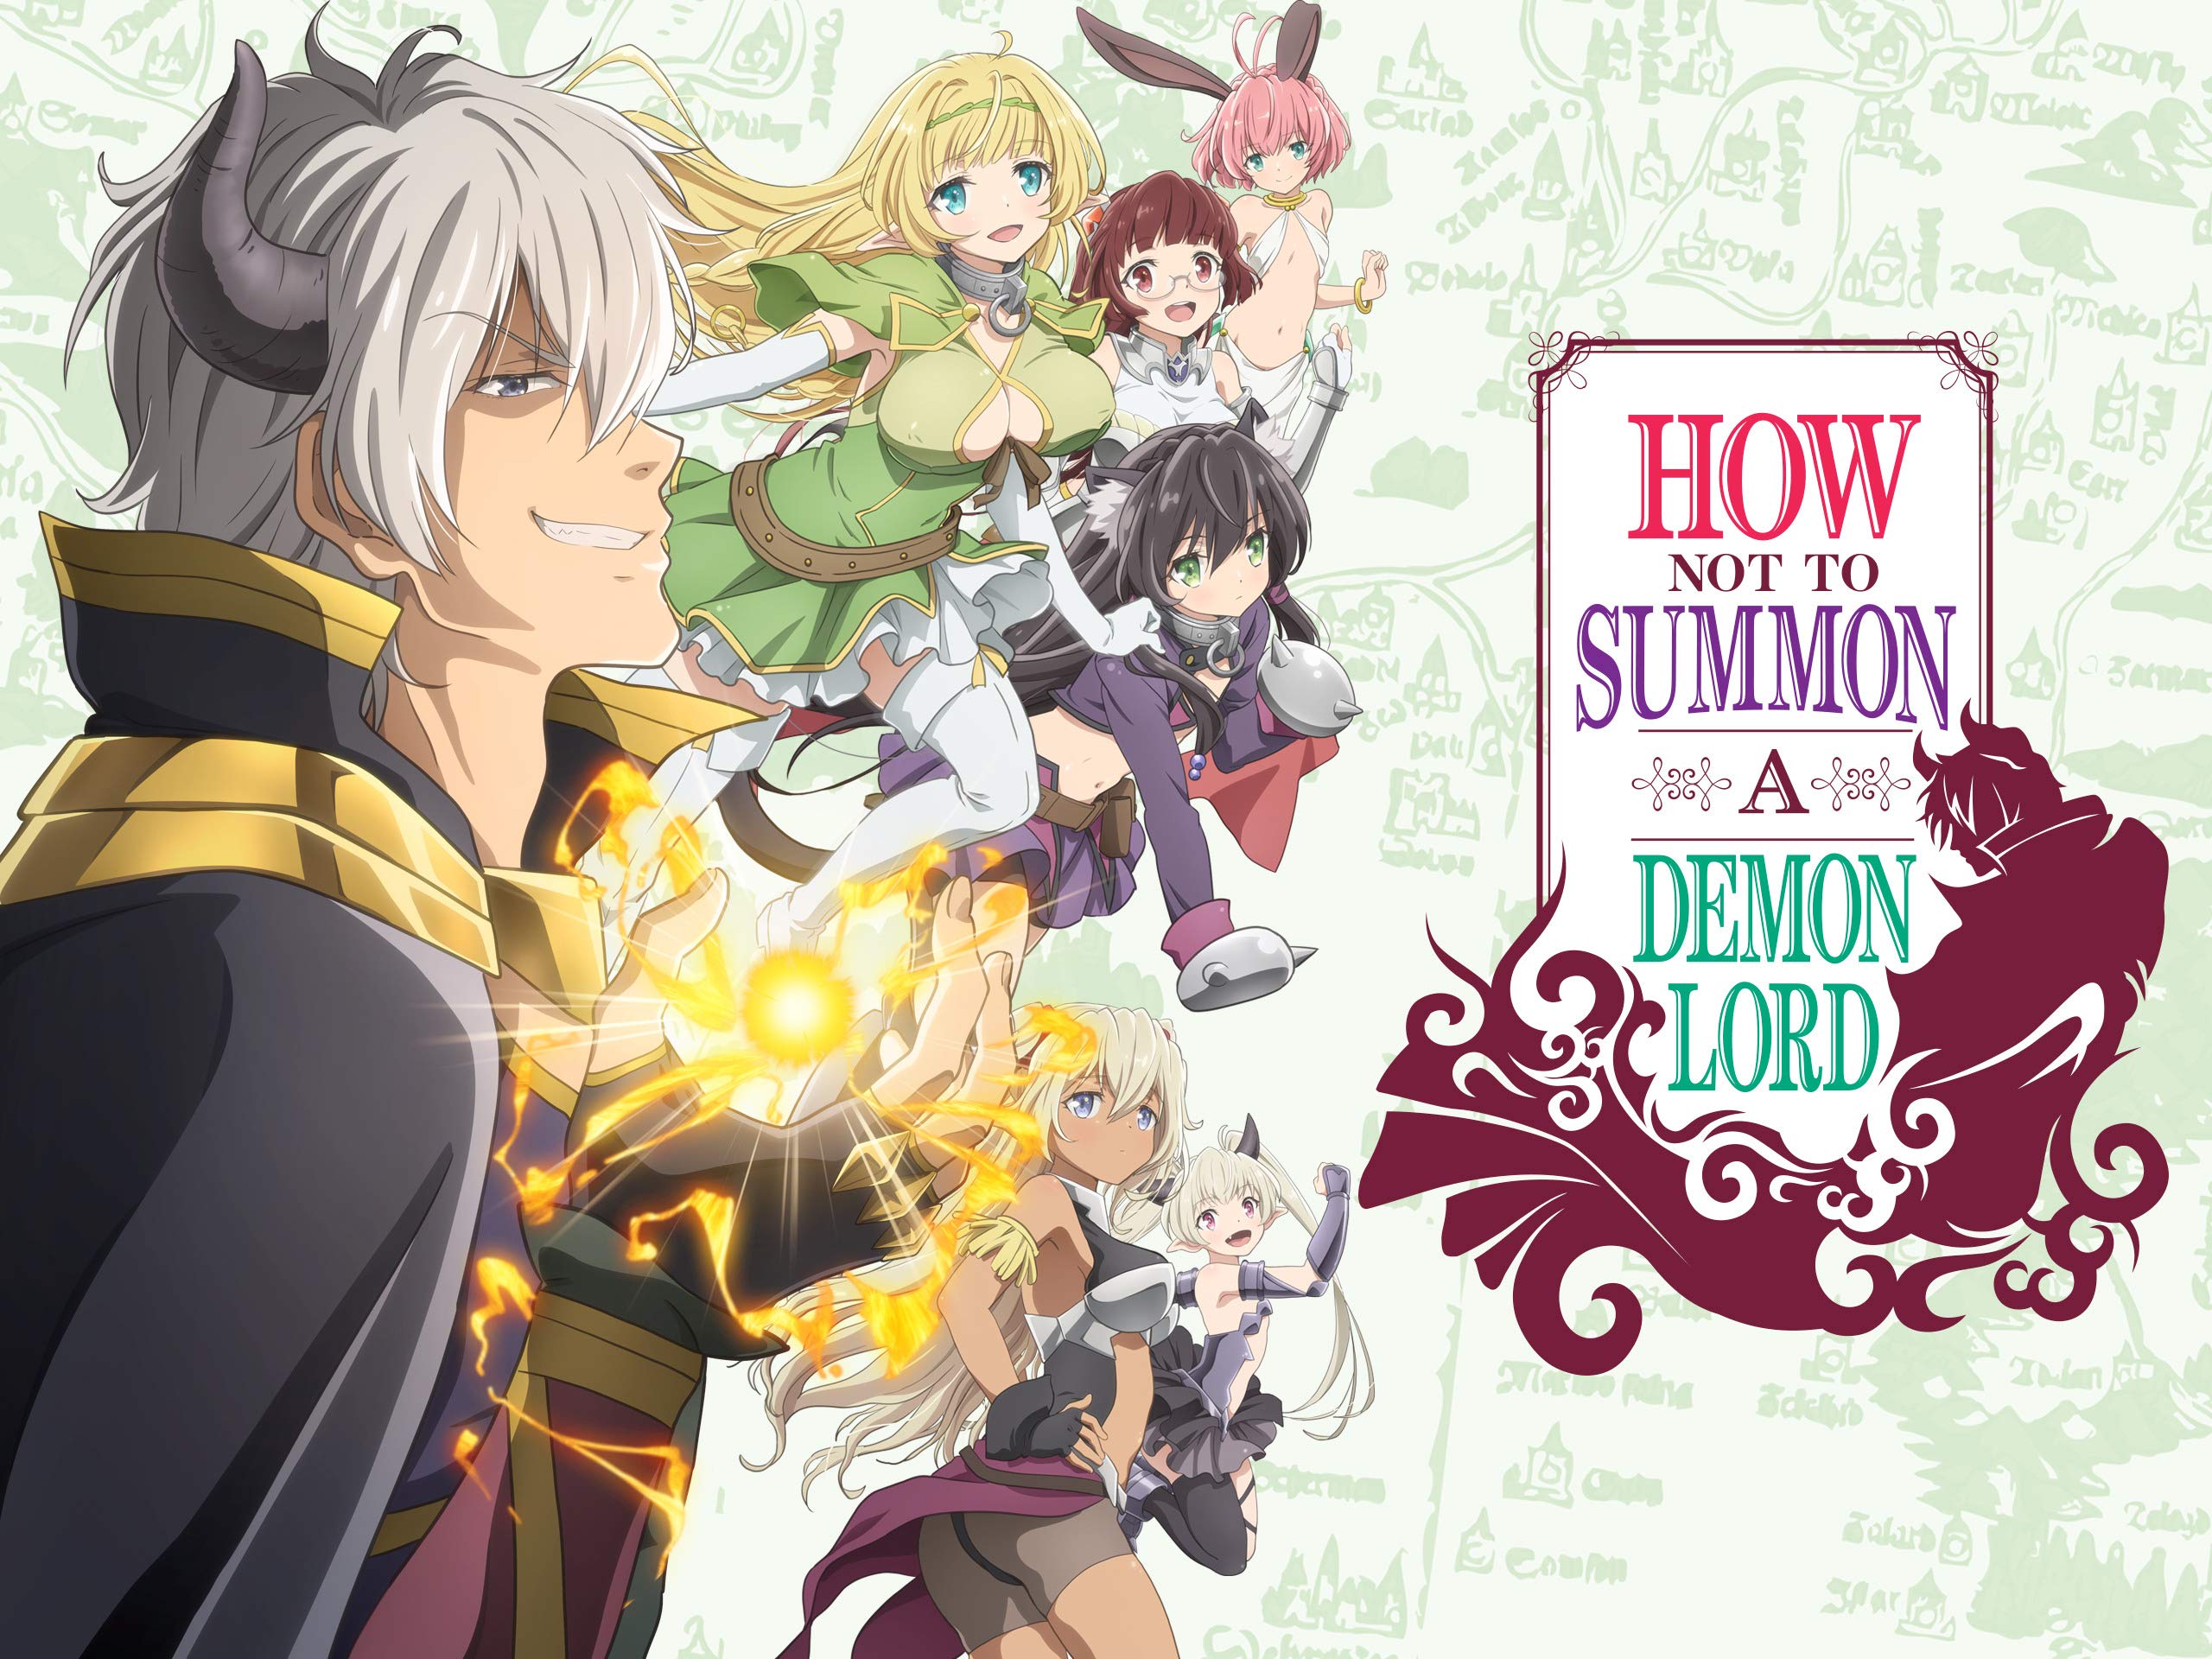 How not to summon a demon lord